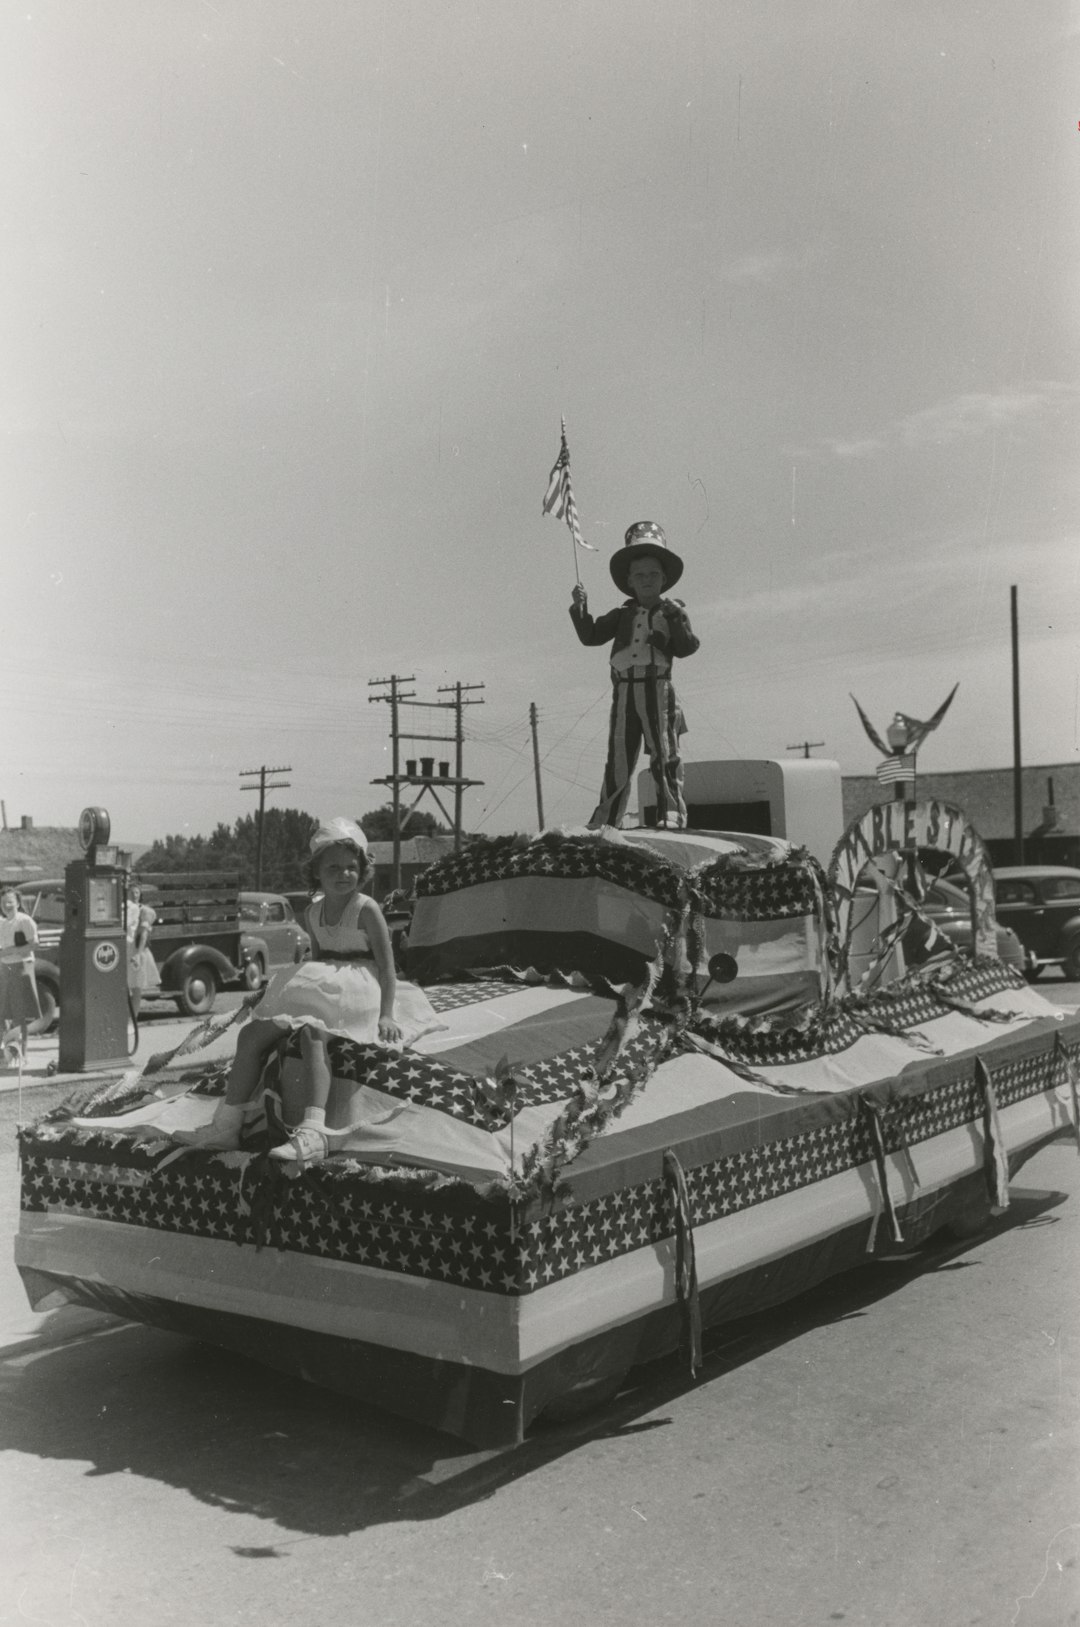 grayscale photography of children riding a USA-themed float